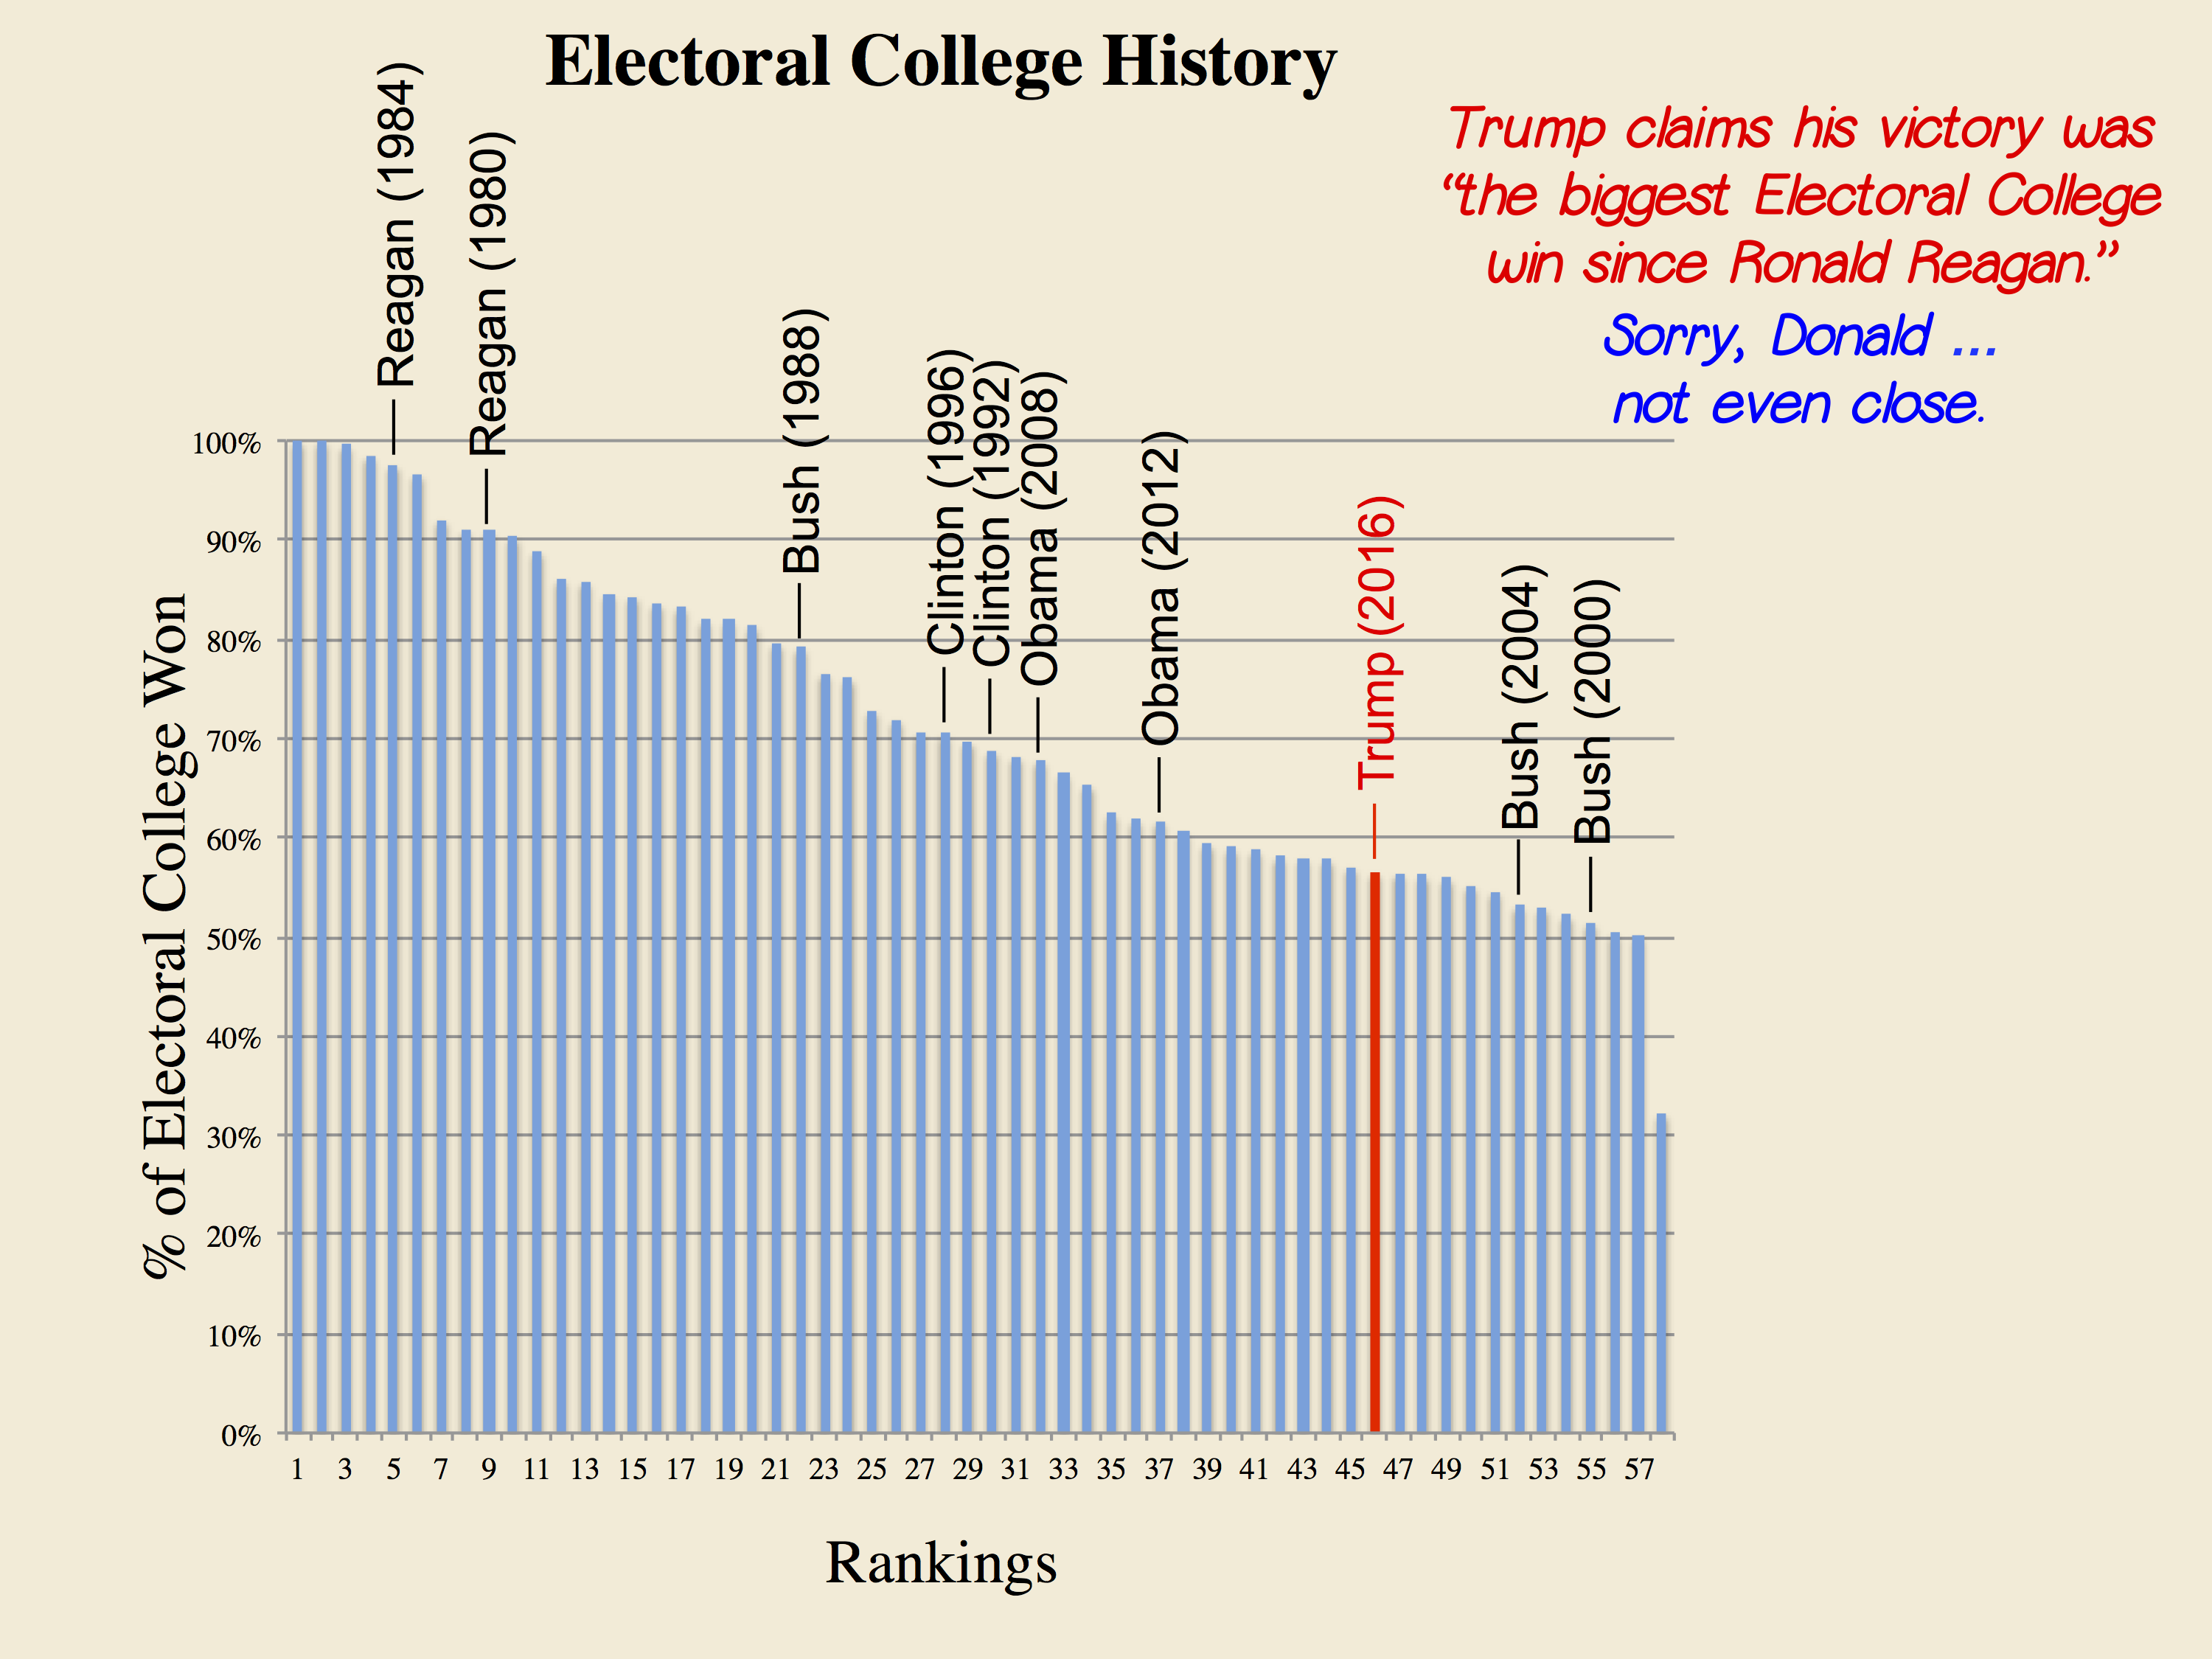 Trump says he won Electoral College by biggest margin since Reagan.  Not even close